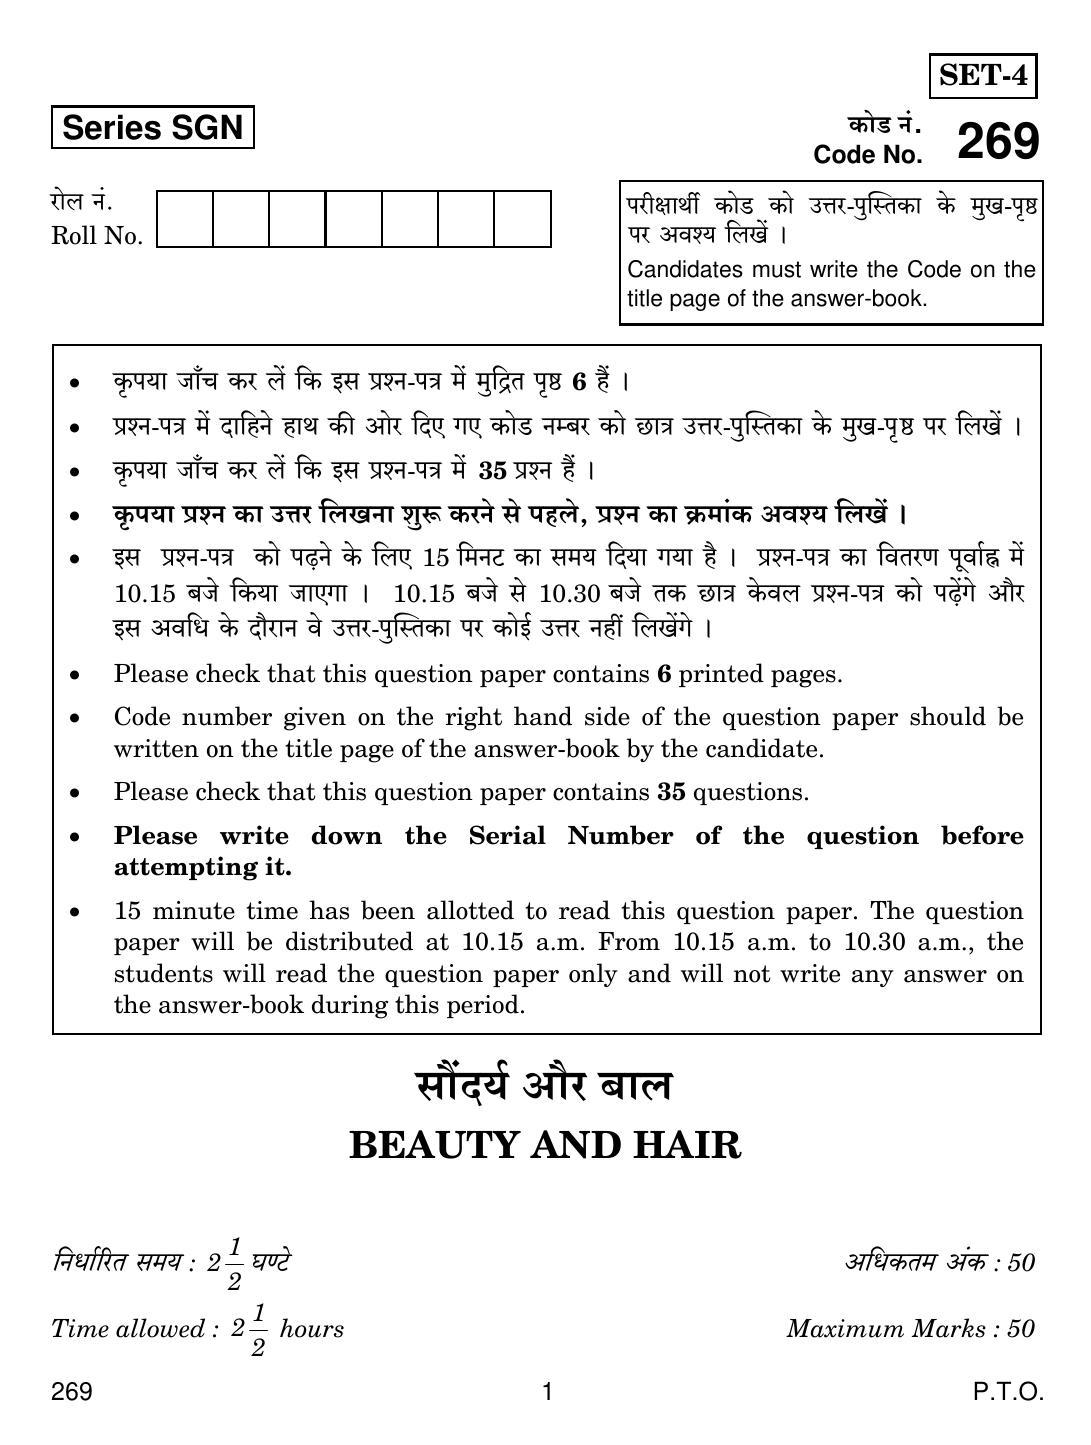 CBSE Class 12 269 BEAUTY AND HAIR 2018 Question Paper - Page 1